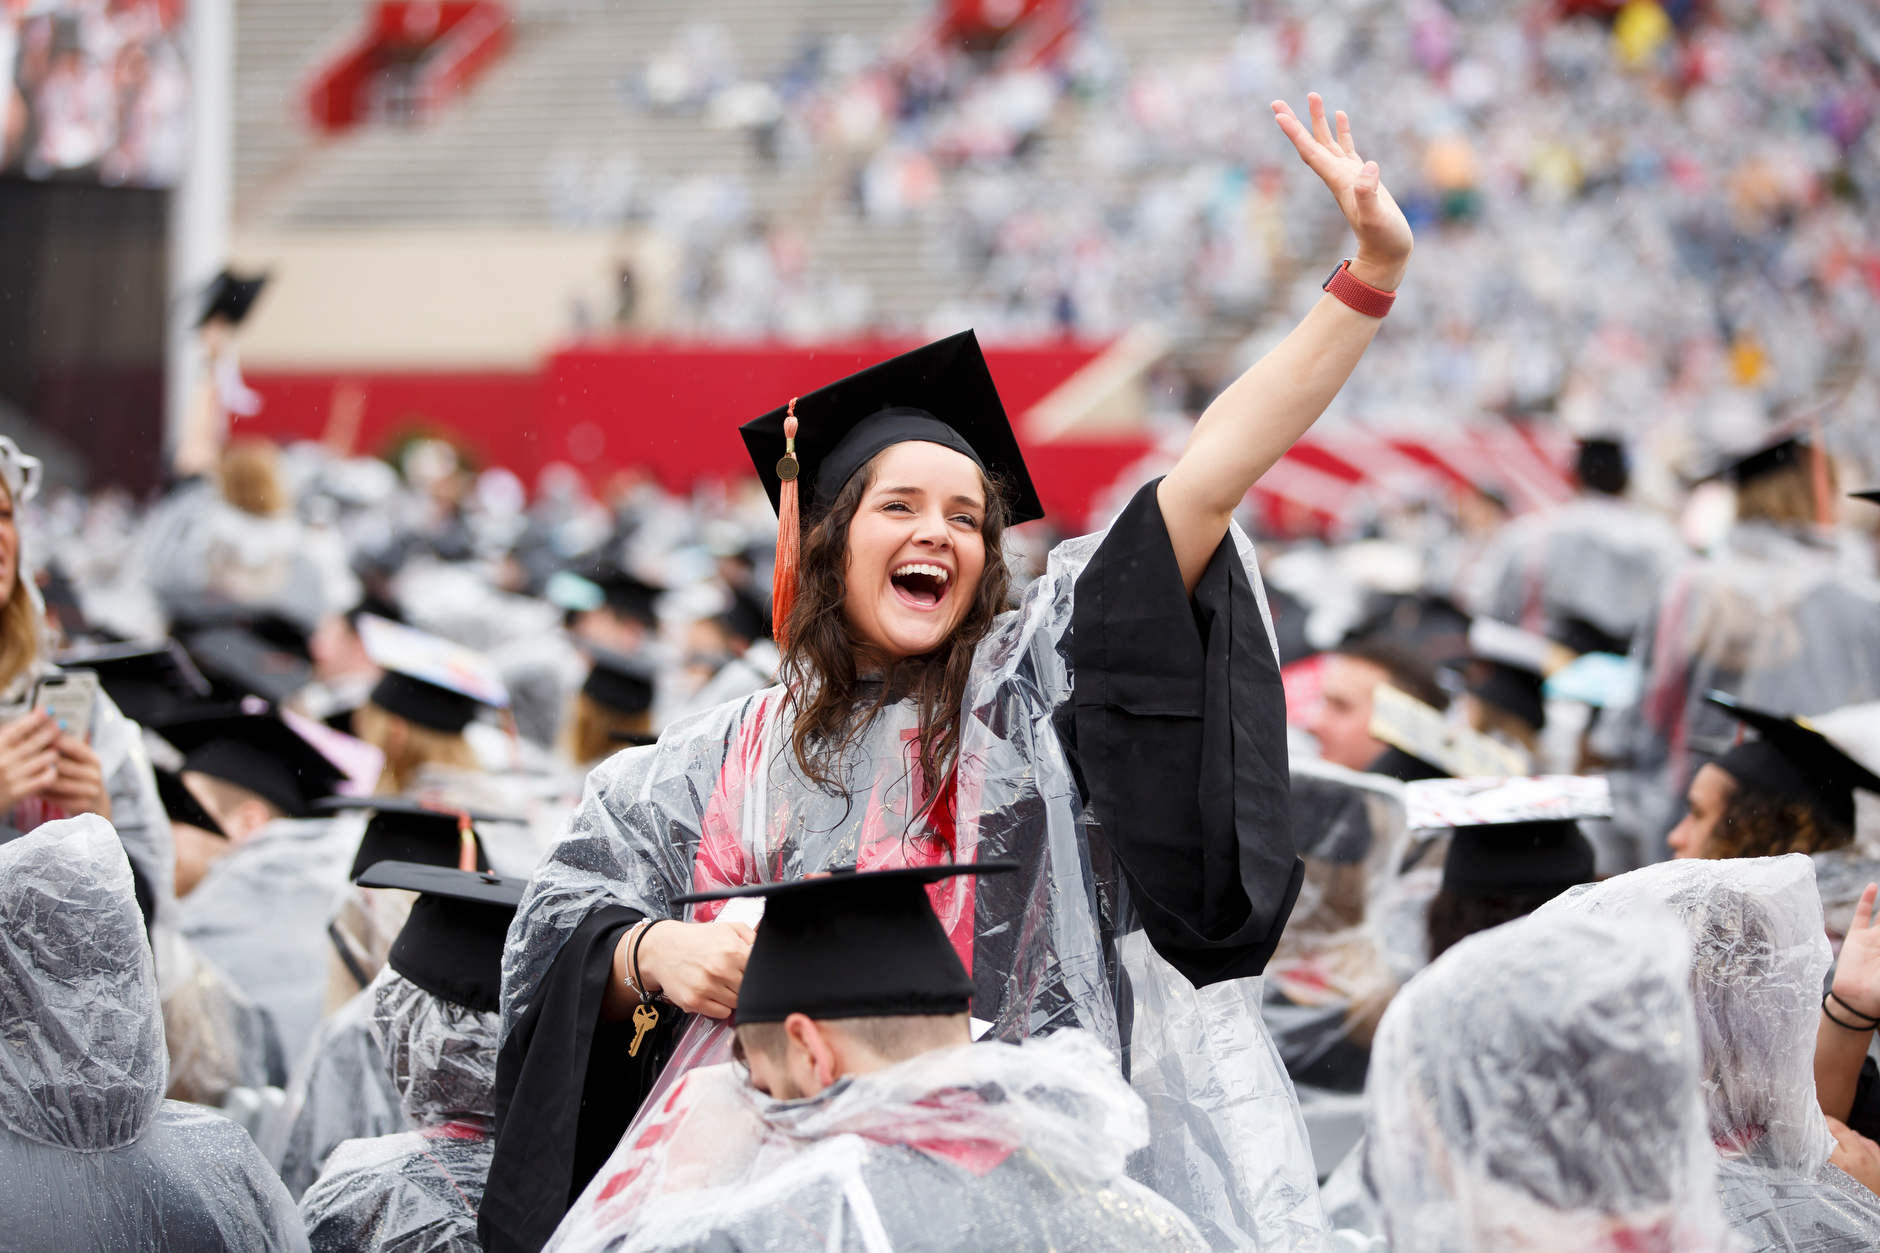 A graduate waves to friends in the audience during the Indiana University Bloomington Undergraduate Commencement at Memorial Stadium on Saturday, May 4, 2019. (James Brosher/Indiana University)